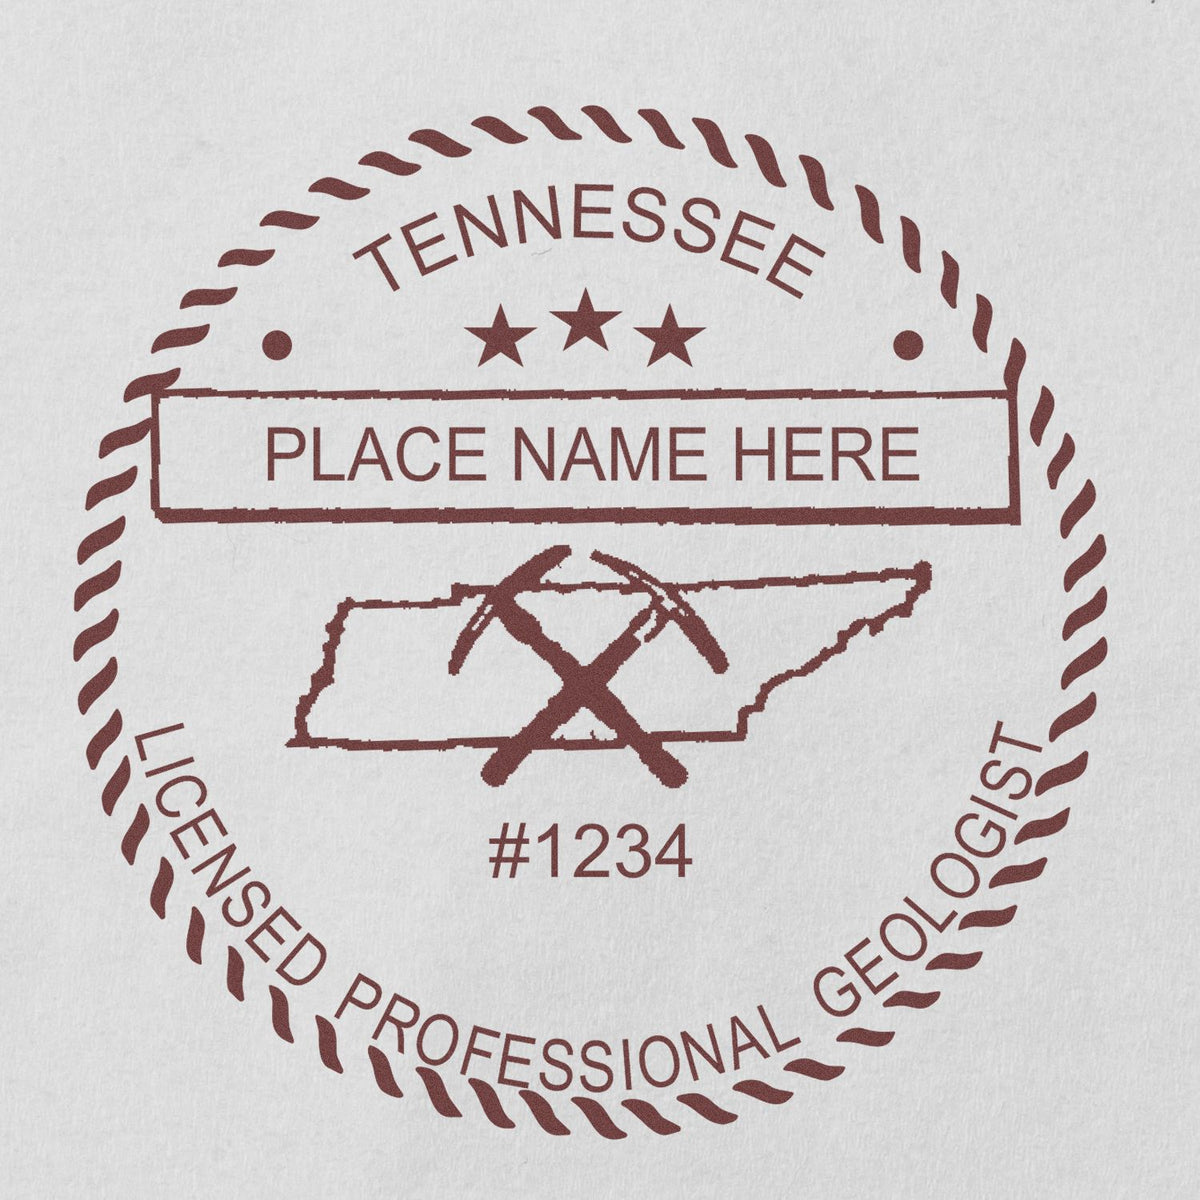 Another Example of a stamped impression of the Slim Pre-Inked Tennessee Professional Geologist Seal Stamp on a office form